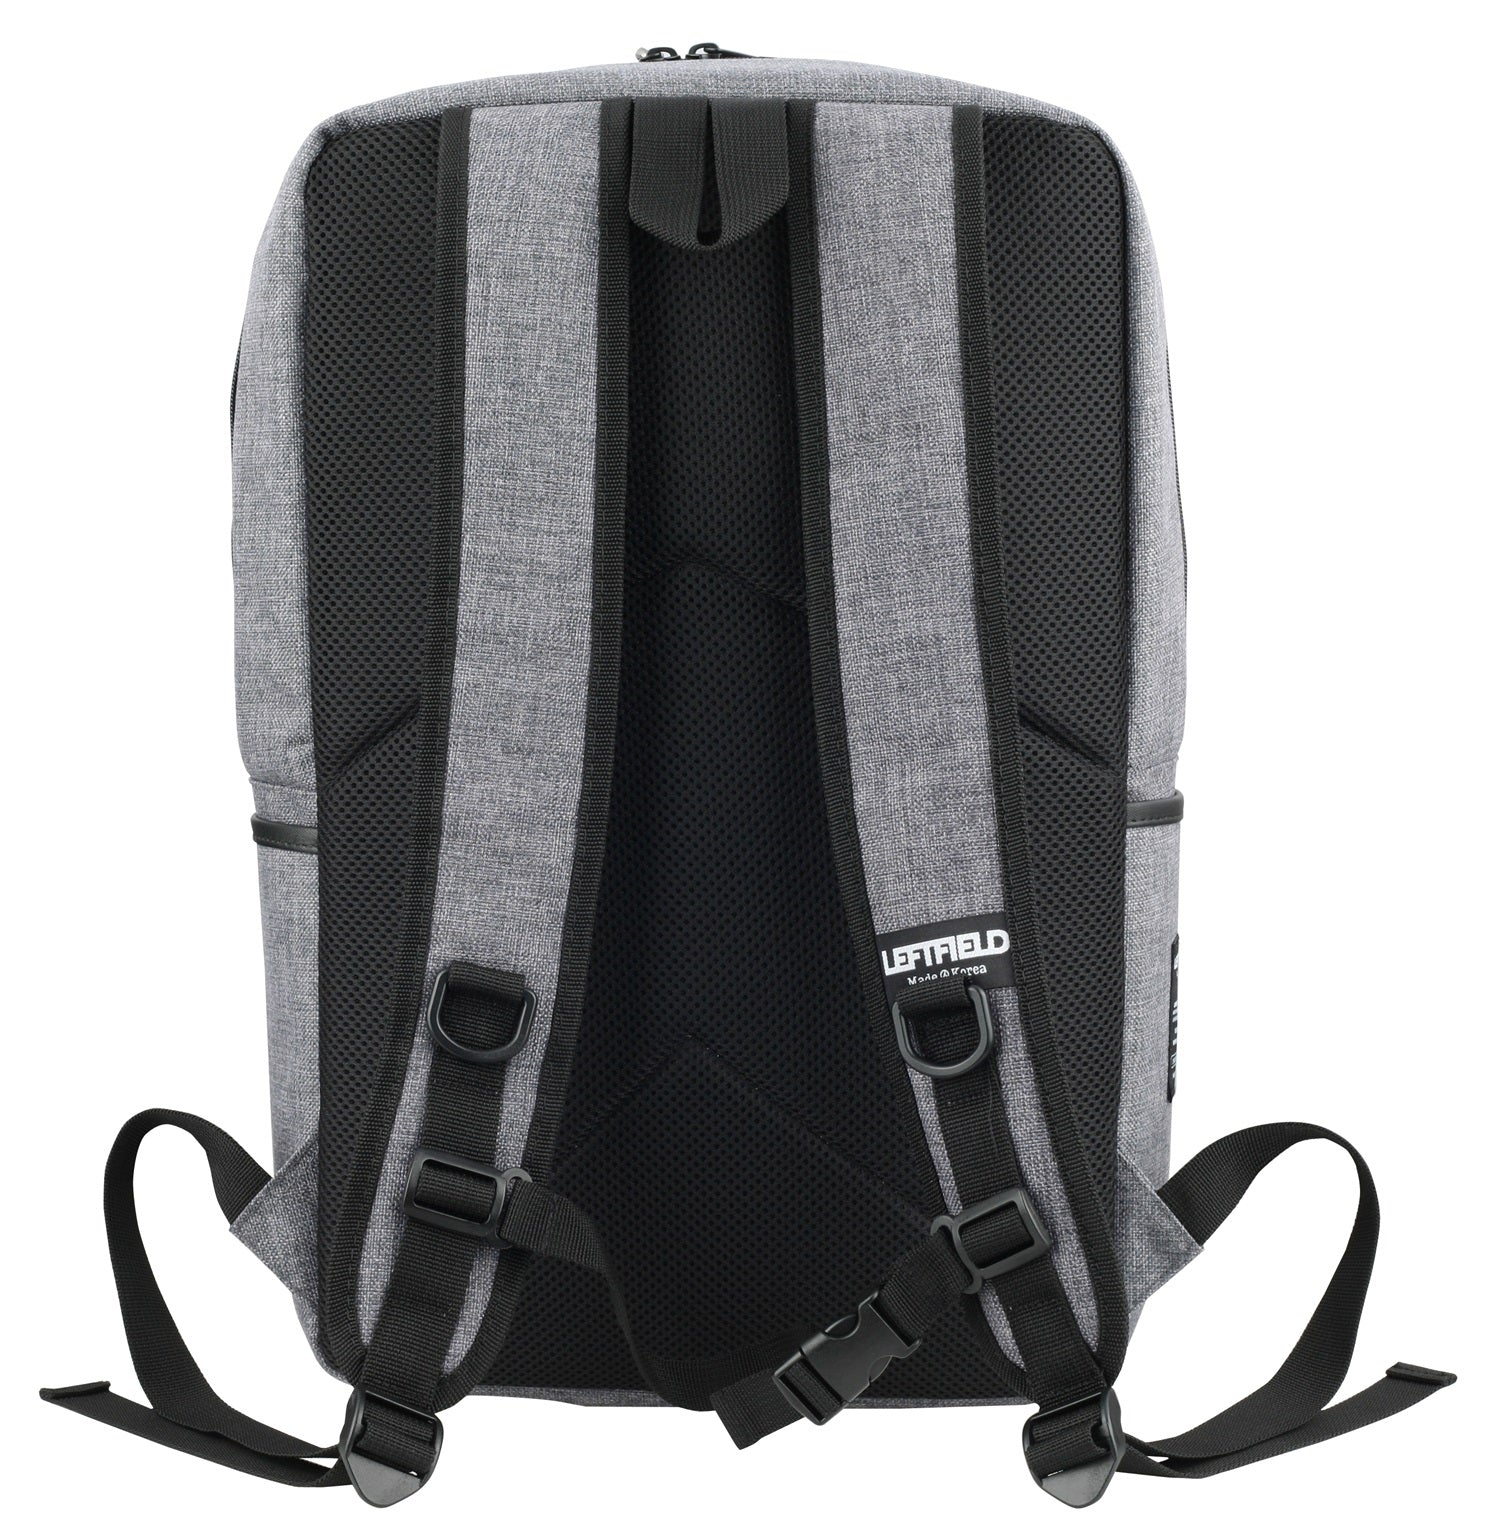 Gray Square Canvas School Laptop Backpacks Travel Hiking Bags